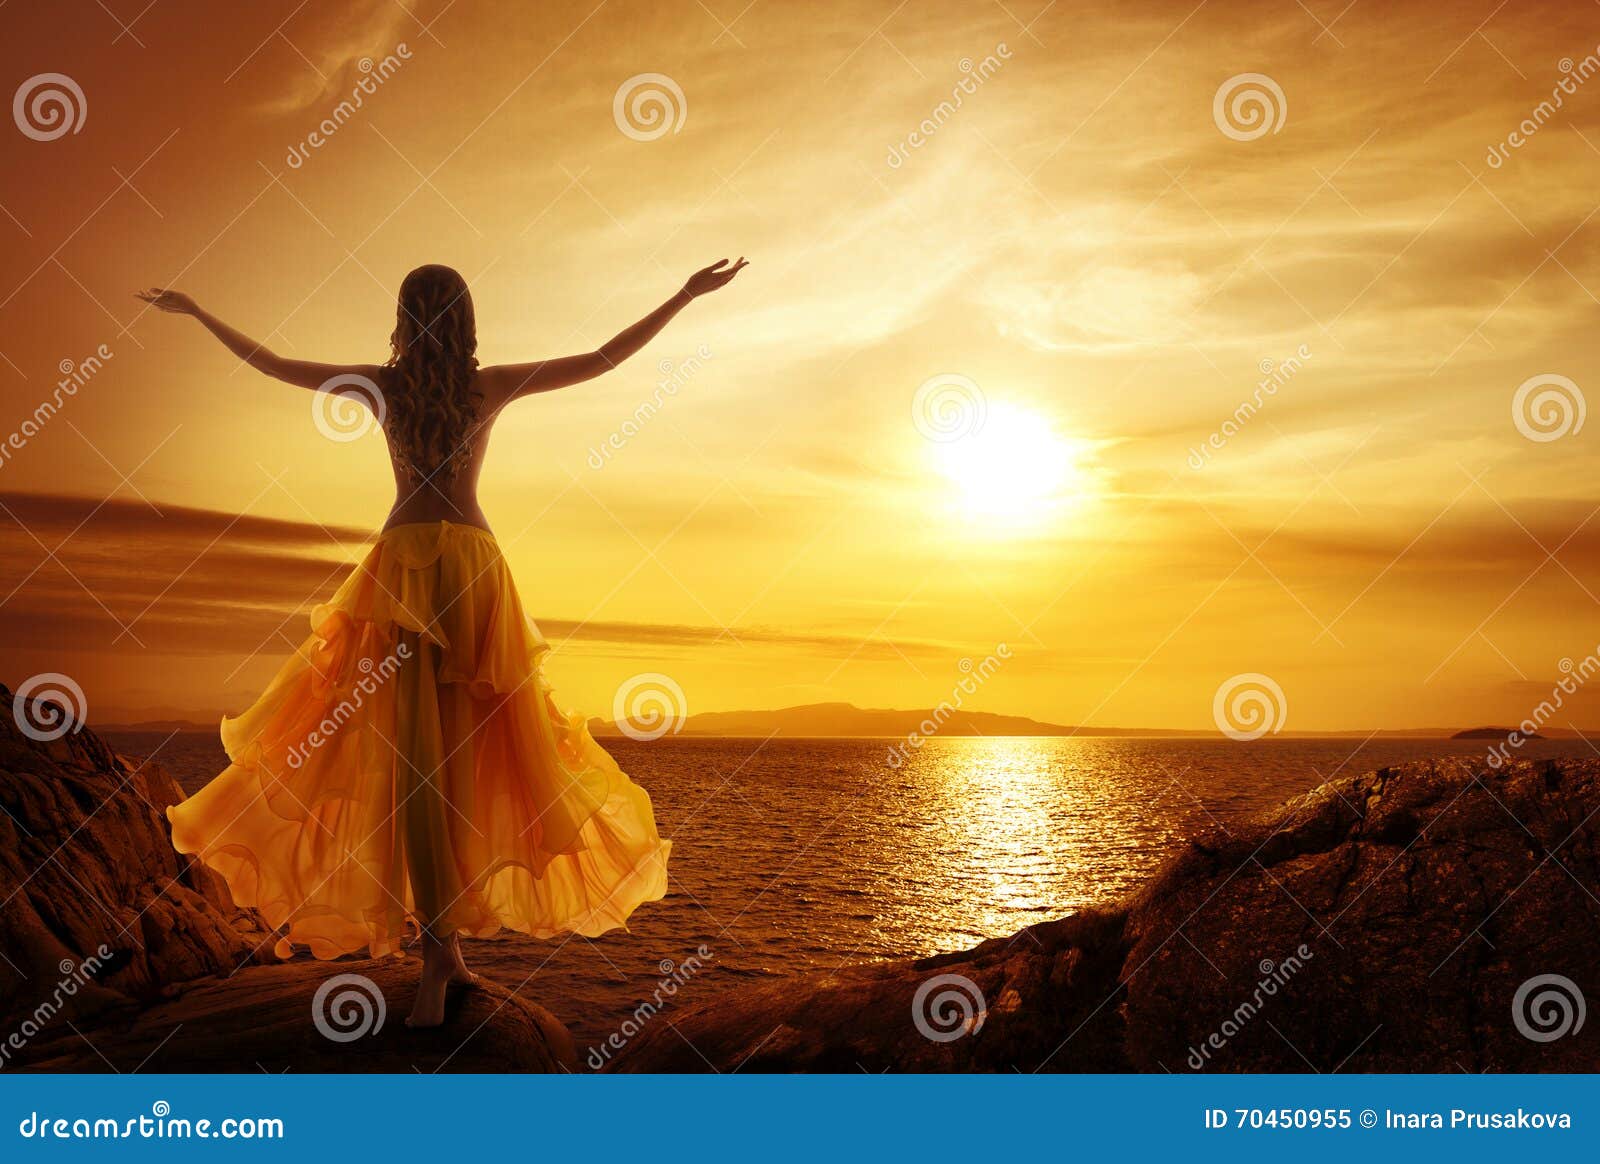 calm woman meditating on sunset, relax in open arms pose